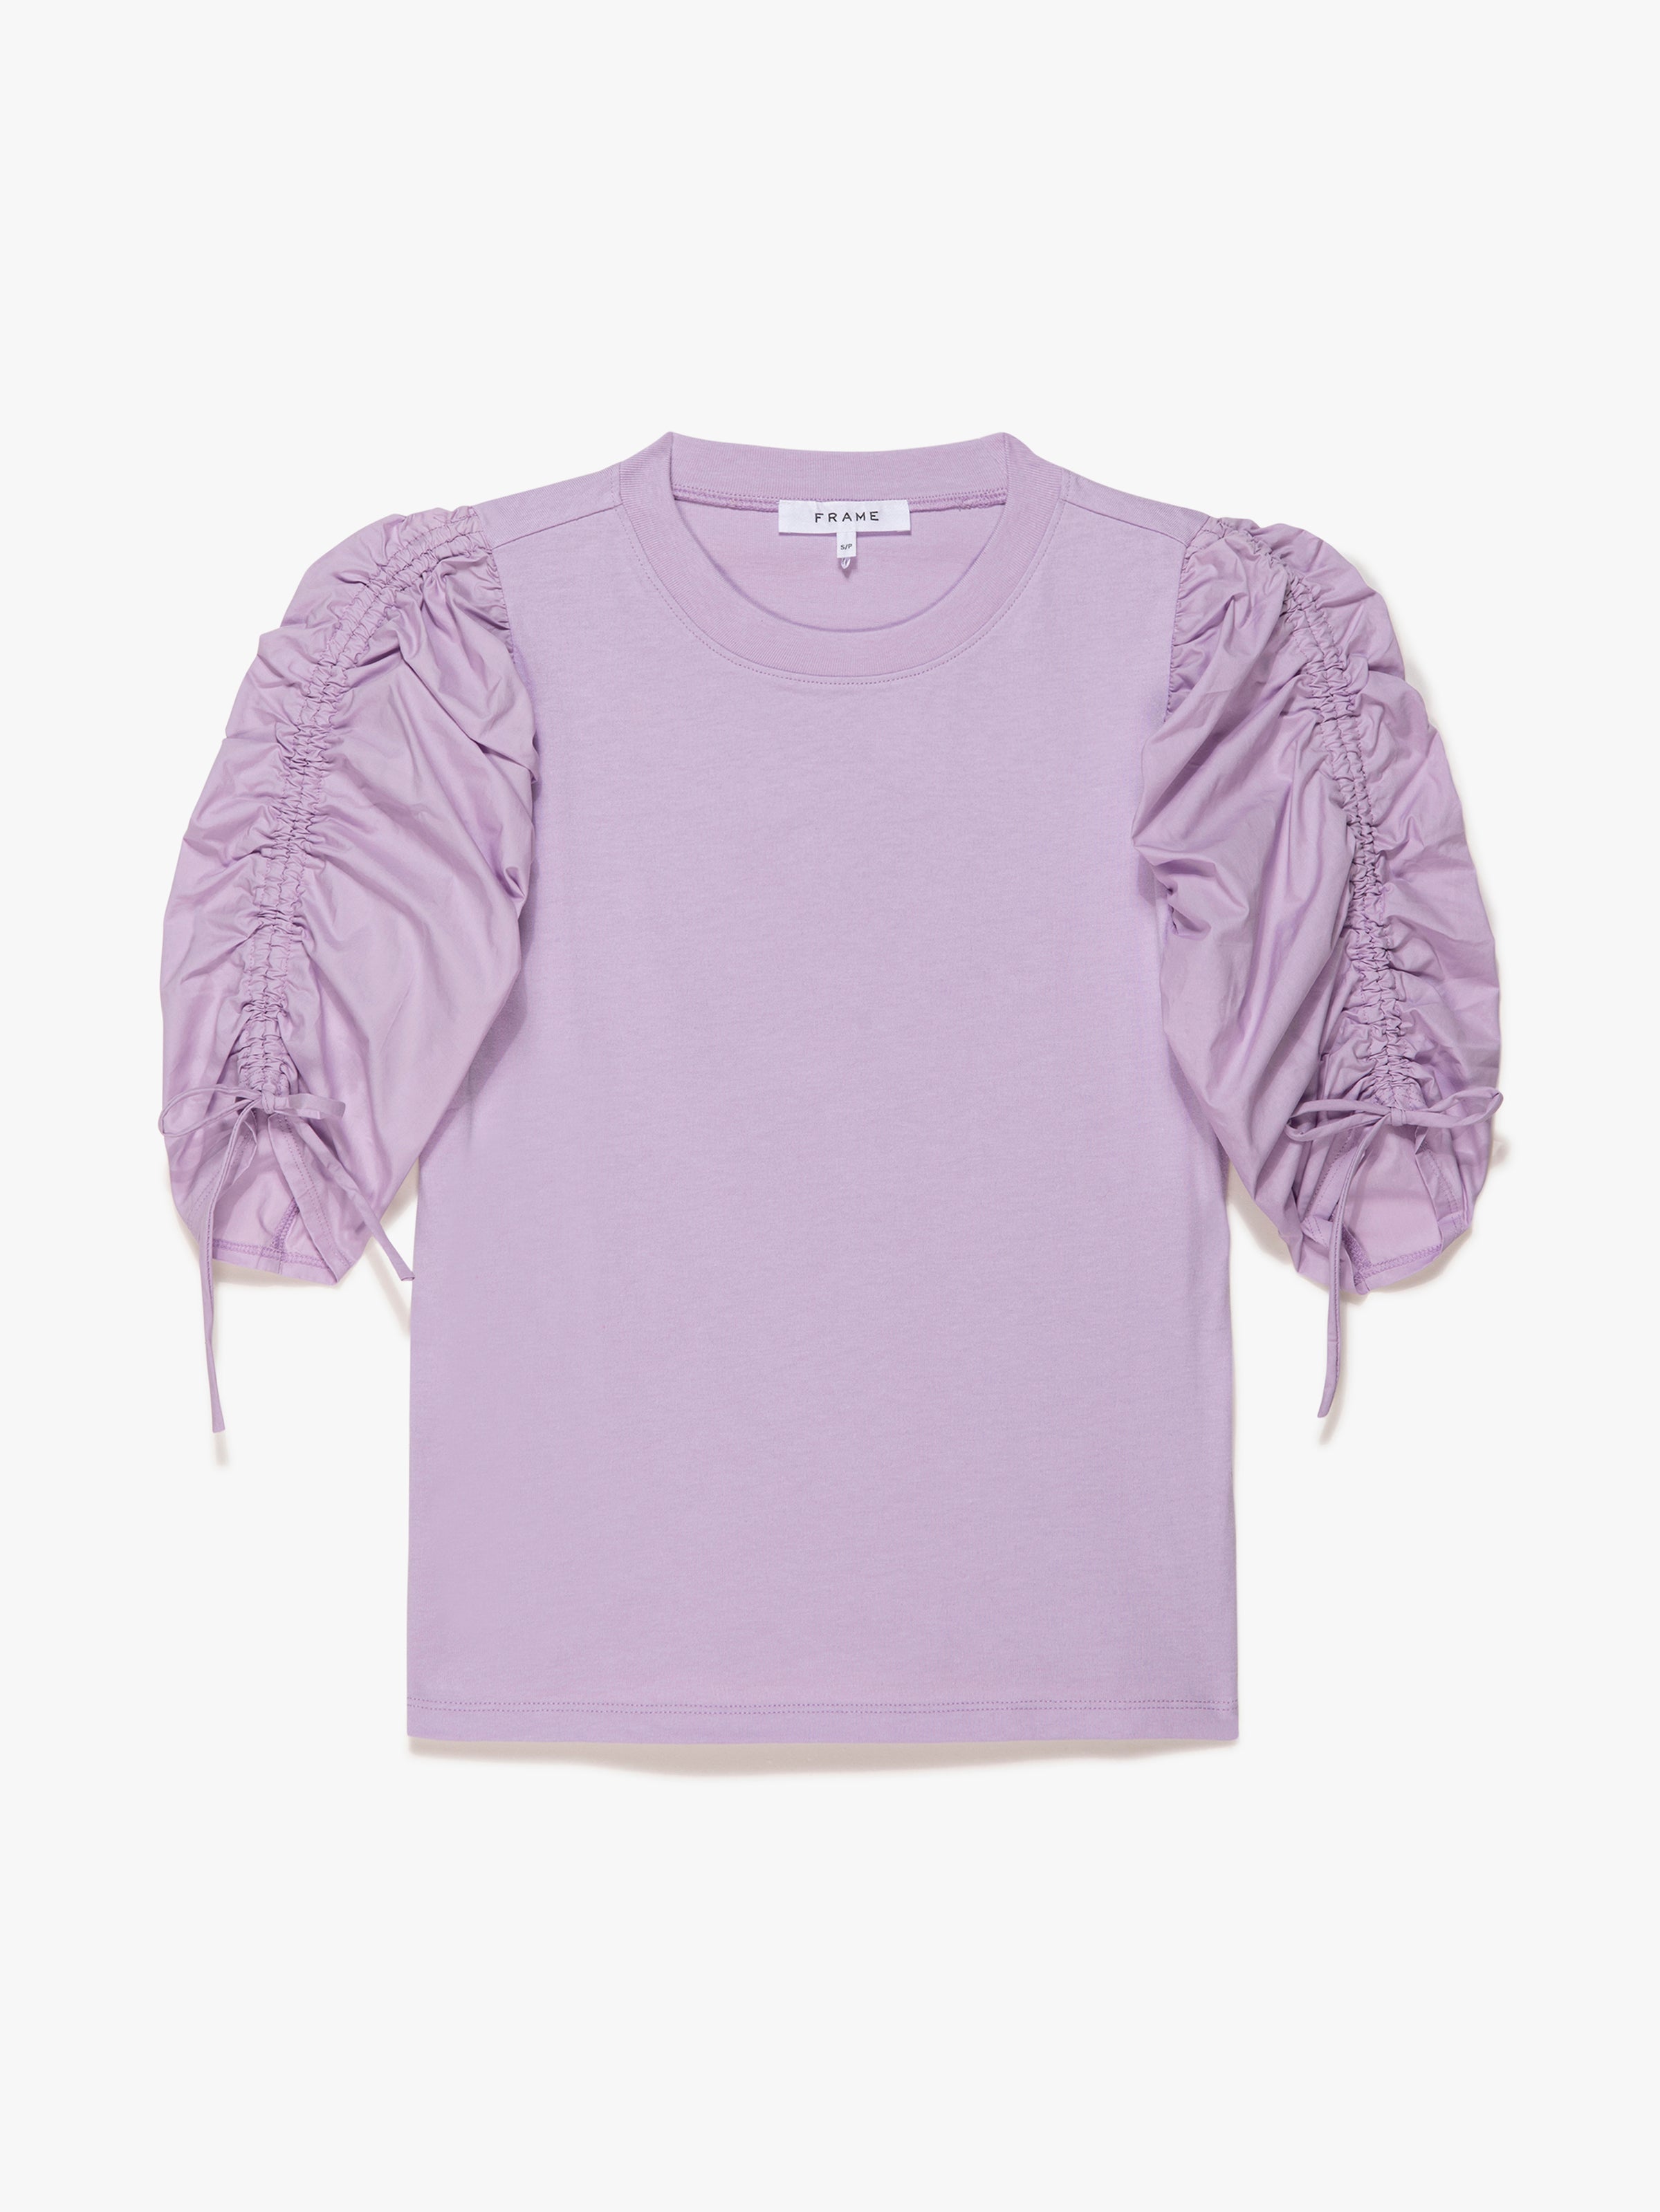 FRAME - Lilac Ruched Tee - Council Studio